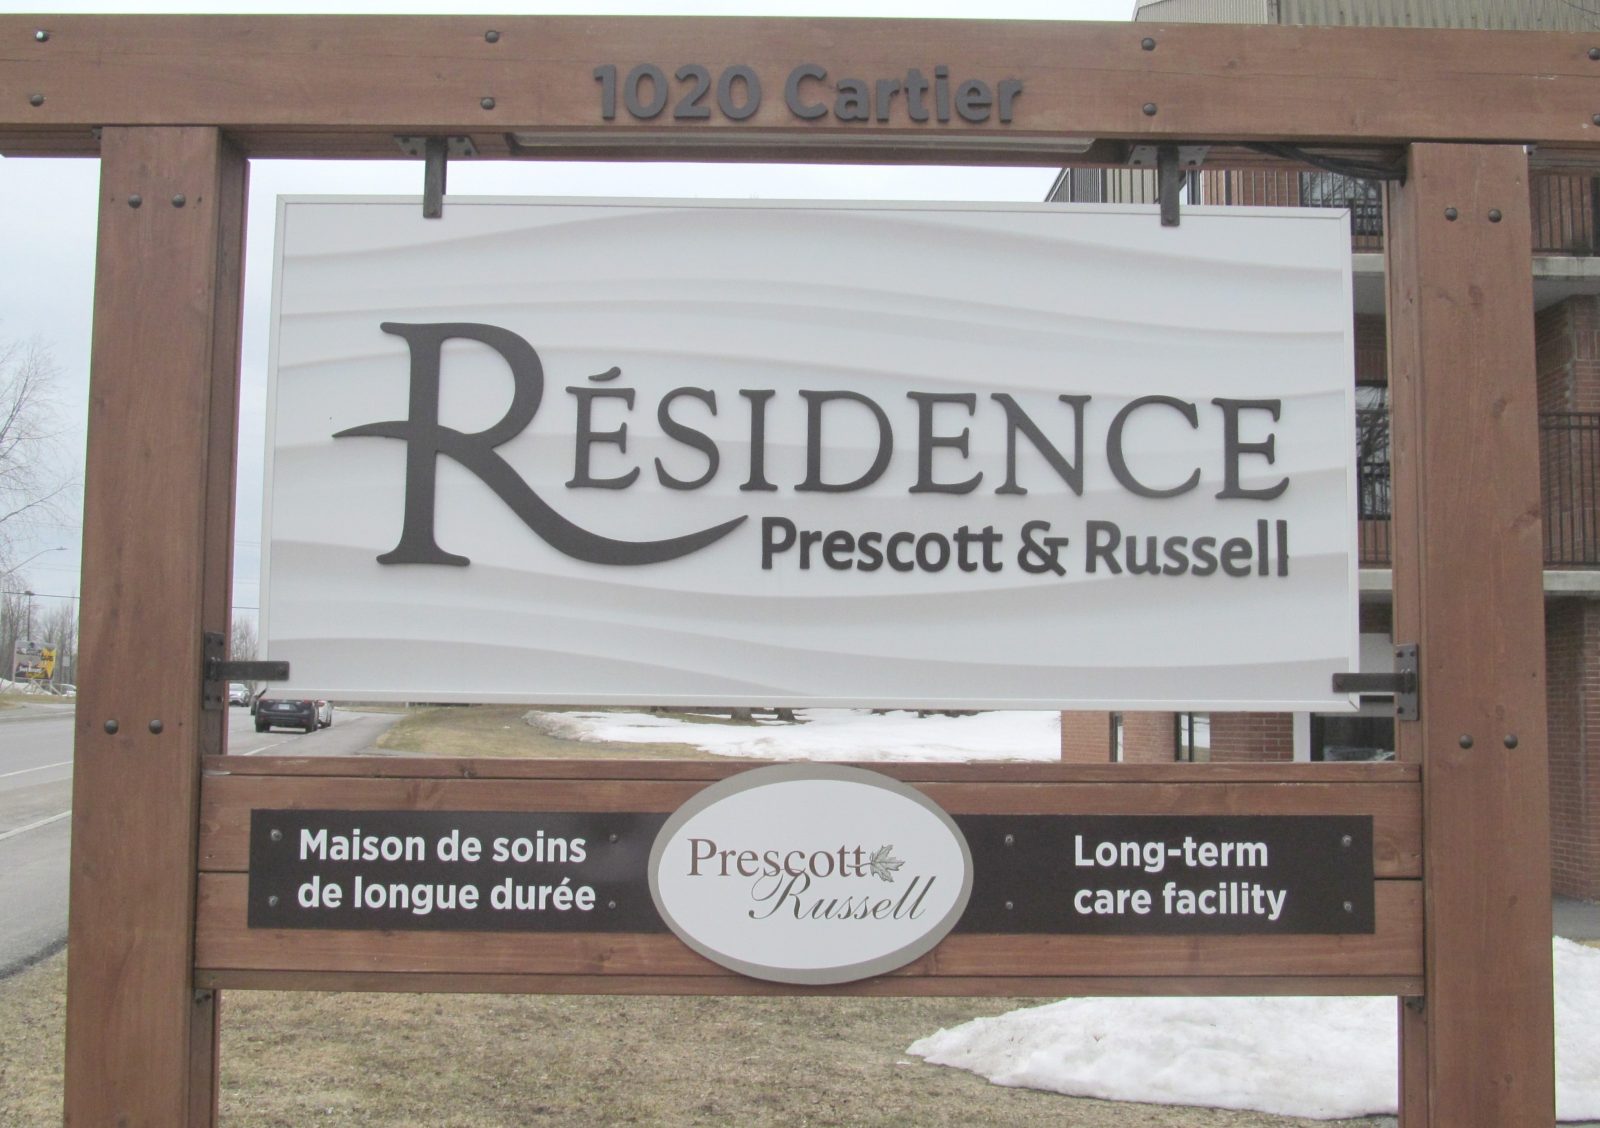 Prescott and Russell Residence COVID outbreak ends